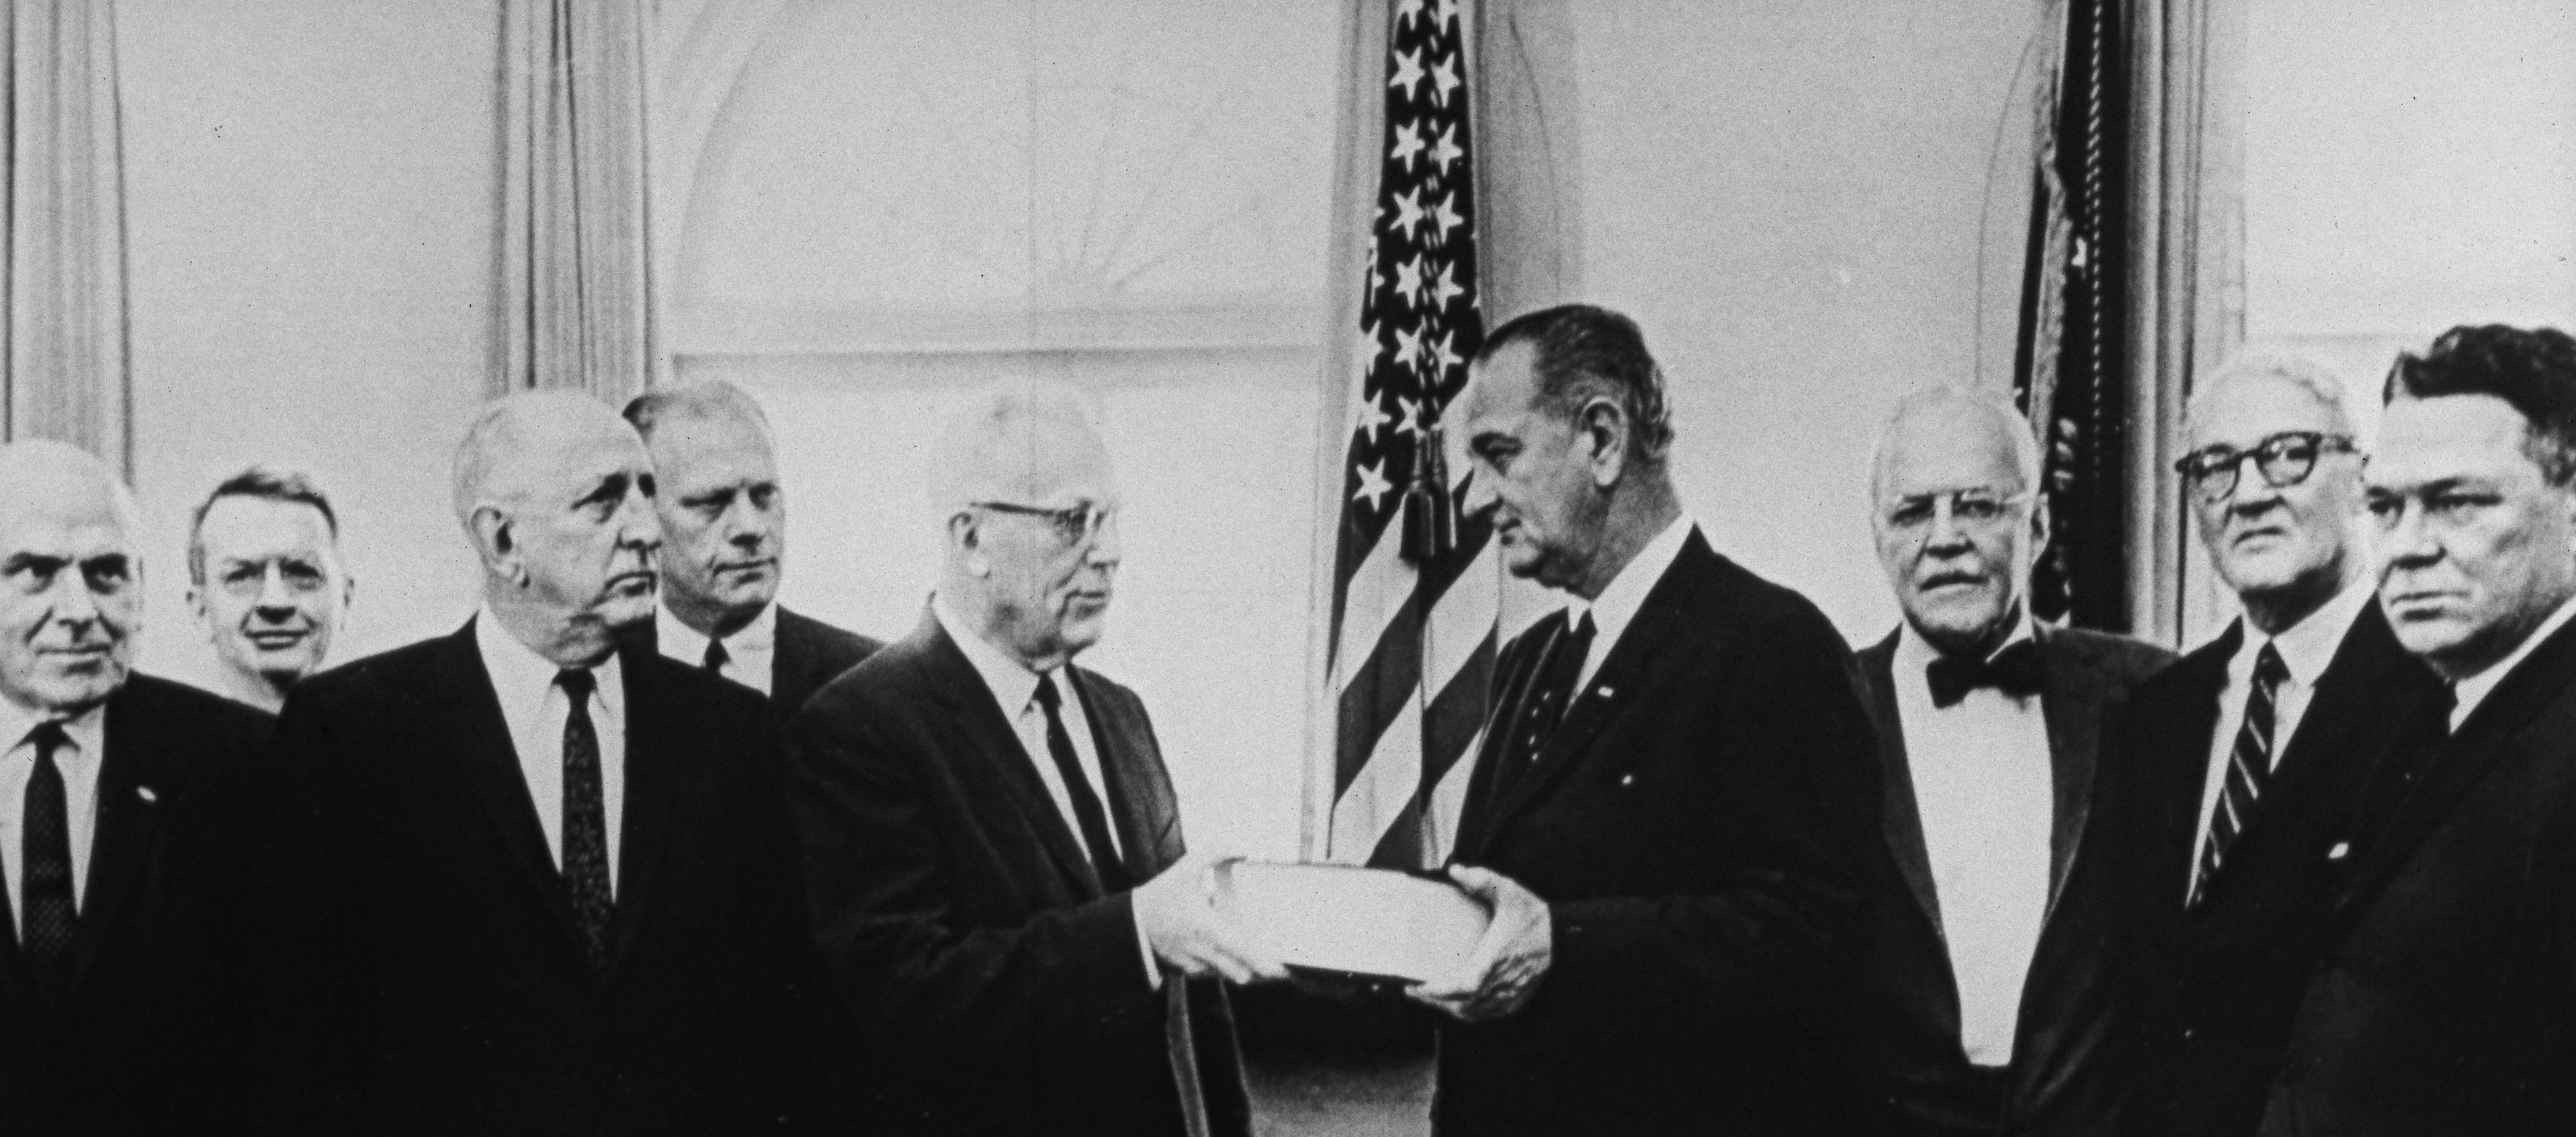 A photograph of the Warren Commission, with President Lyndon Johnson.